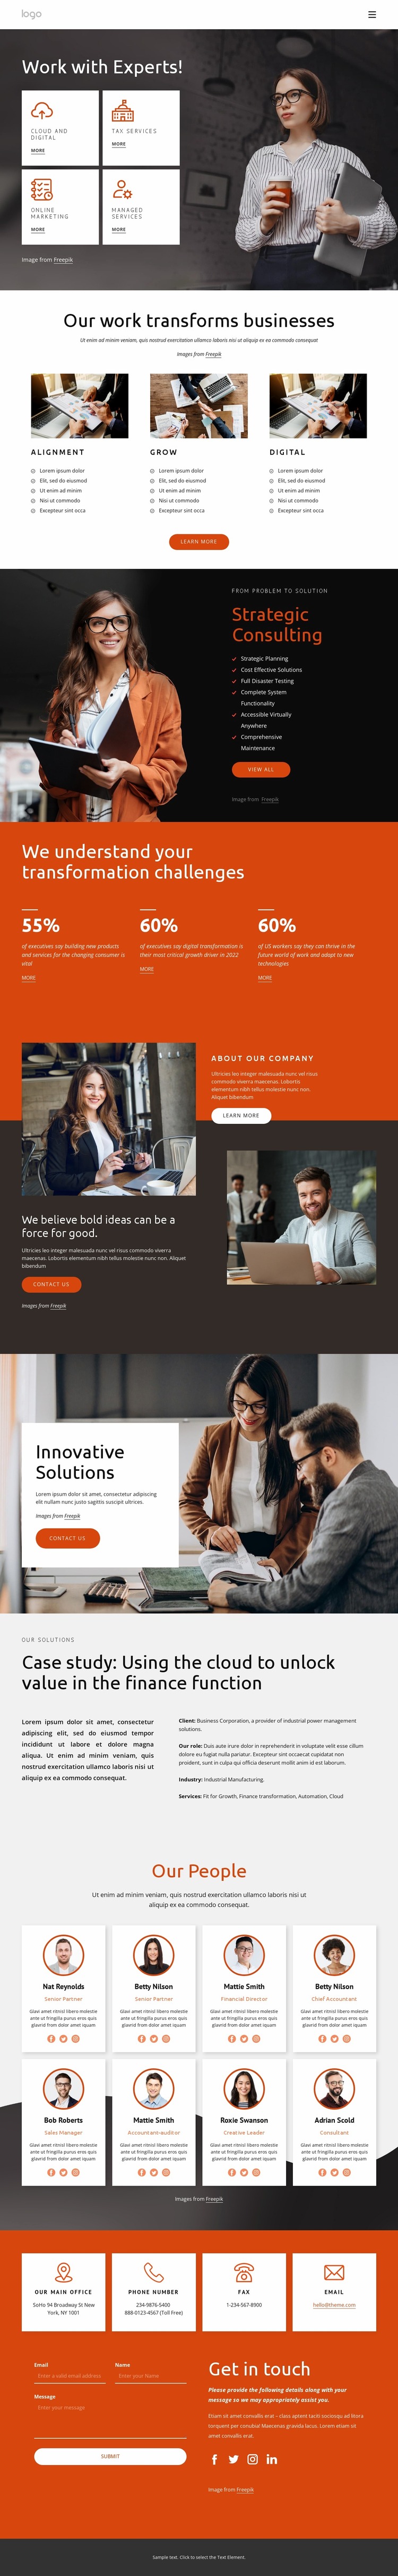 Work with experts Website Mockup